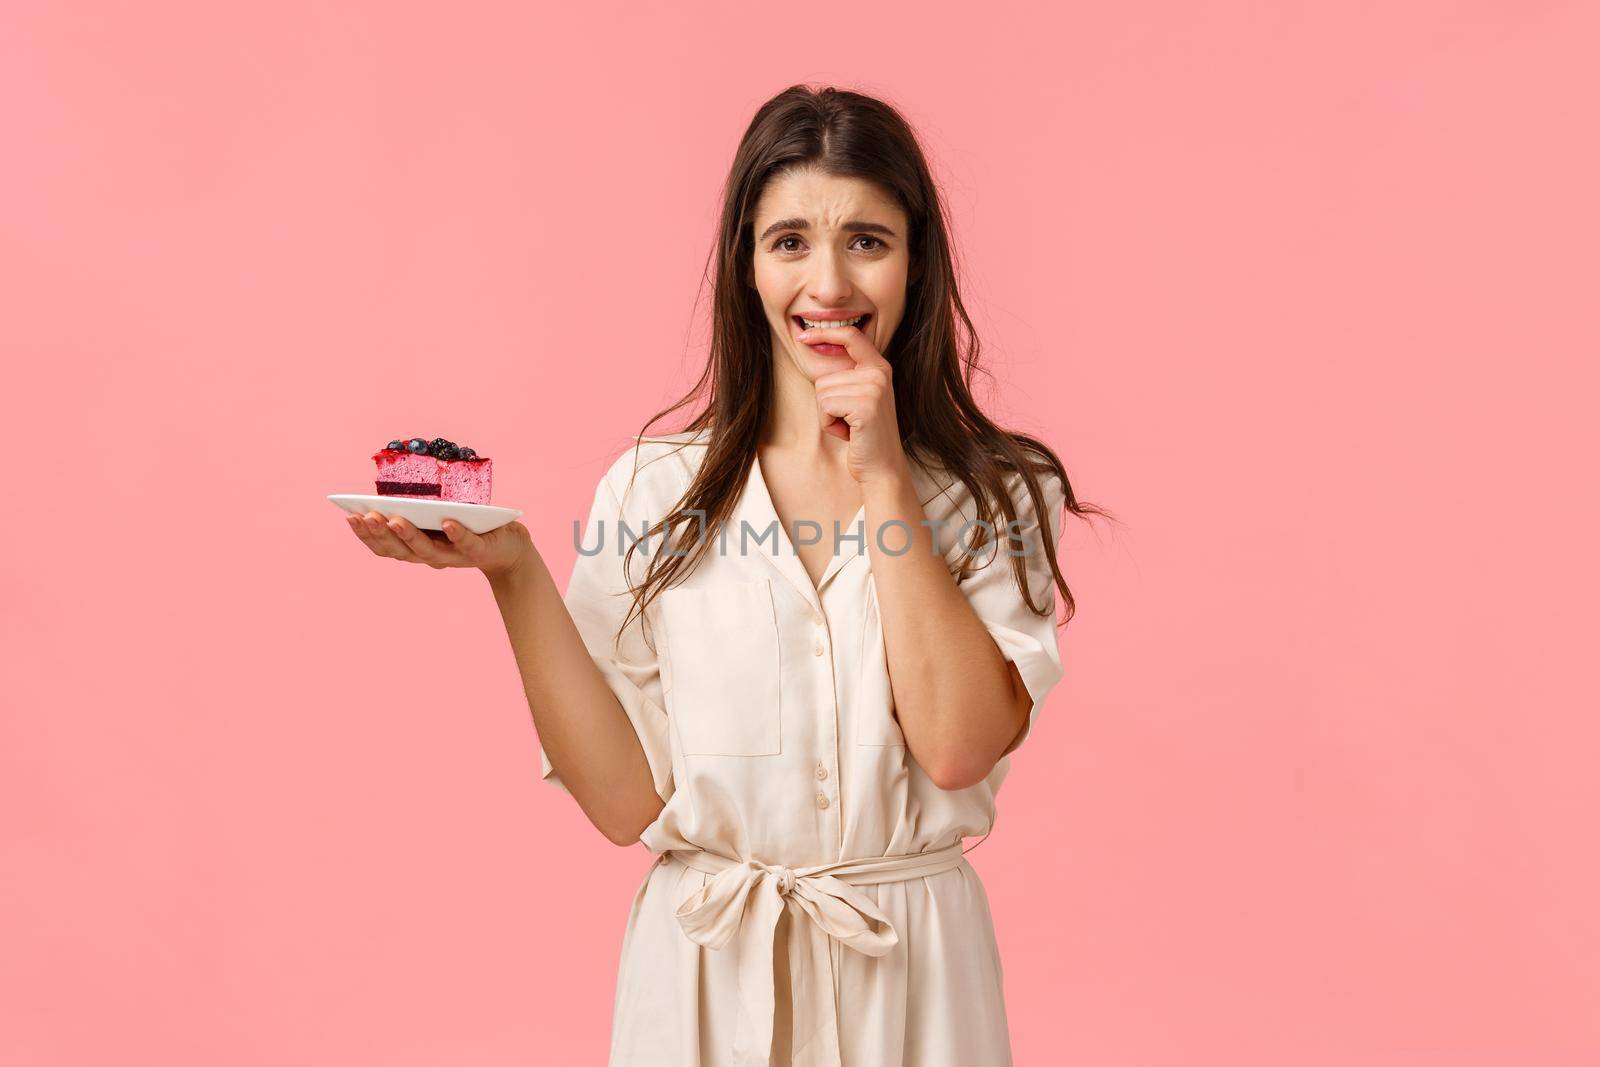 Maybe just one bite. Tempting and eager brunette woman want try tasty piece cake, holding dessert frowning and biting fingernails from desire to eat sweets, resist trying stick diet, pink background.